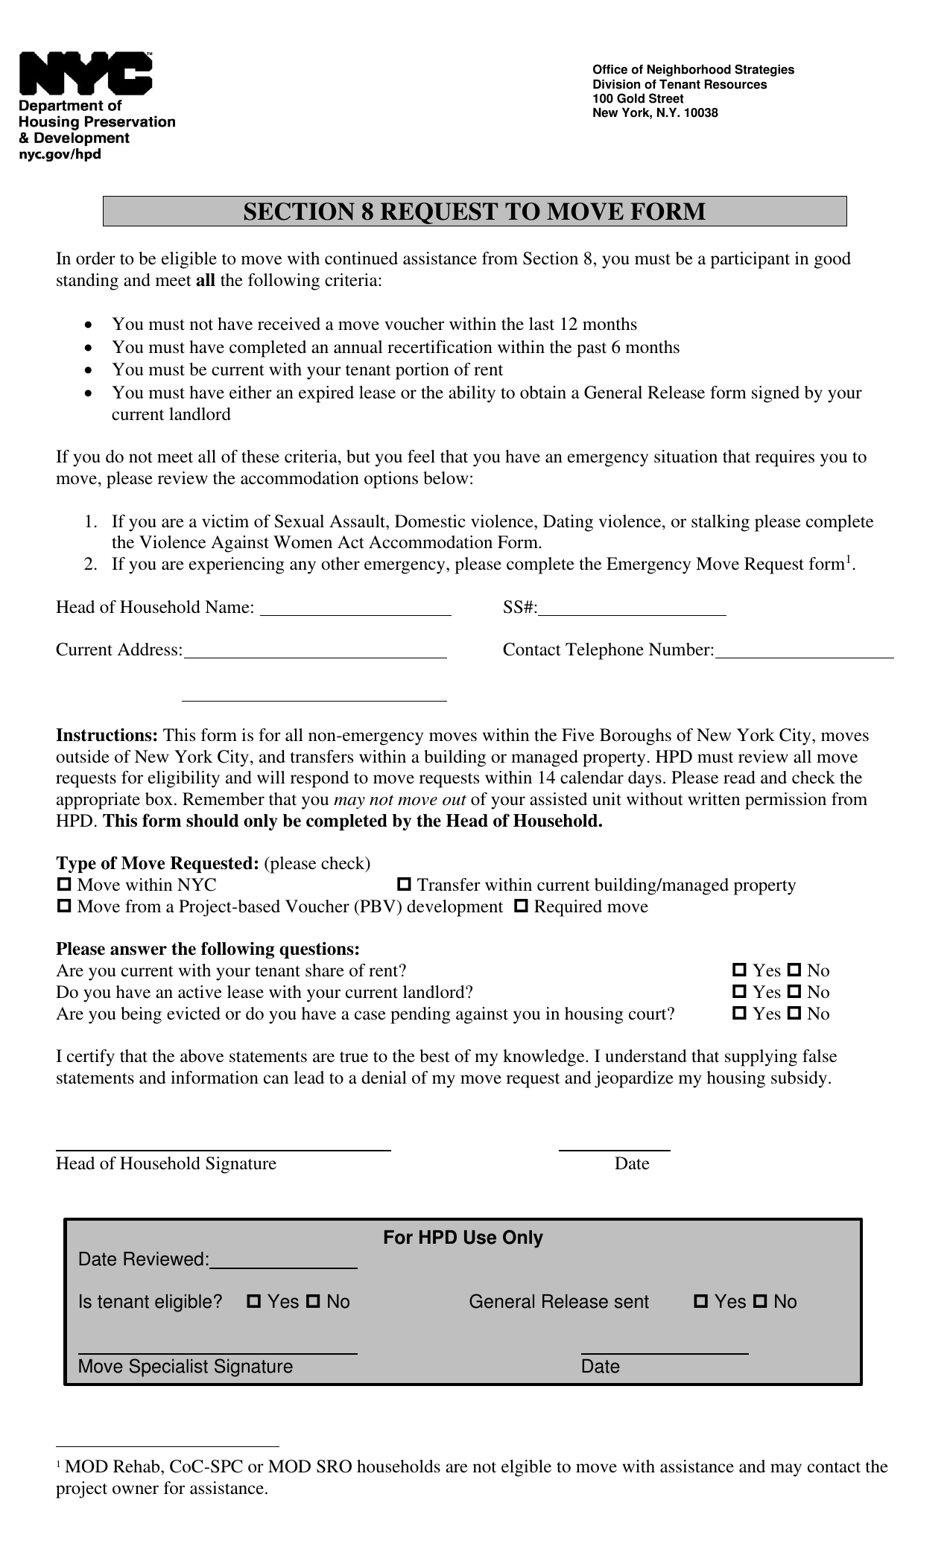 Section 8 Request to Move Form - New York City, Page 1